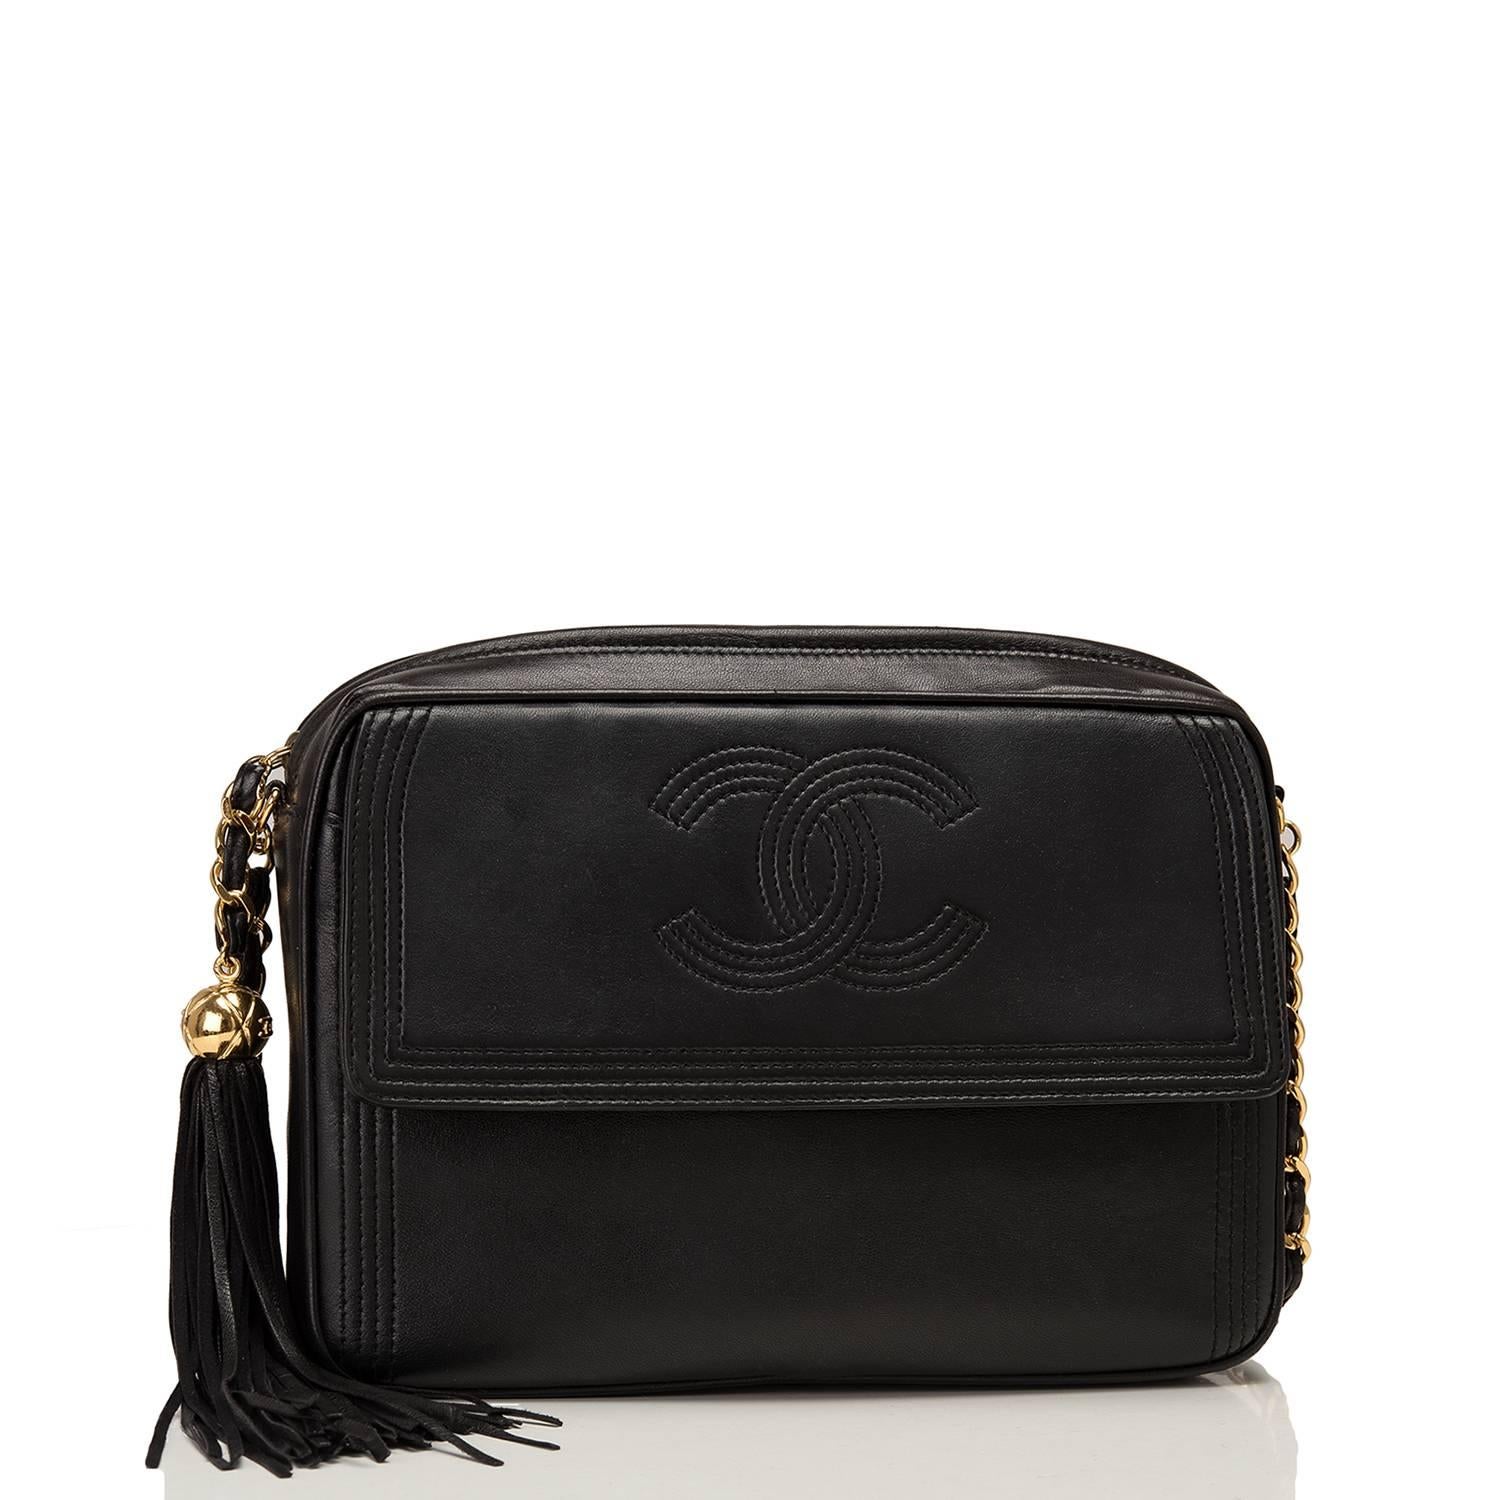 Chanel vintage camera bag of black lambskin leather with gold tone hardware.

This bag features a single pocket at front with snap closure with CC-logo, top zip closure with leather tassel and quilted gold tone ball pull and interwoven gold tone